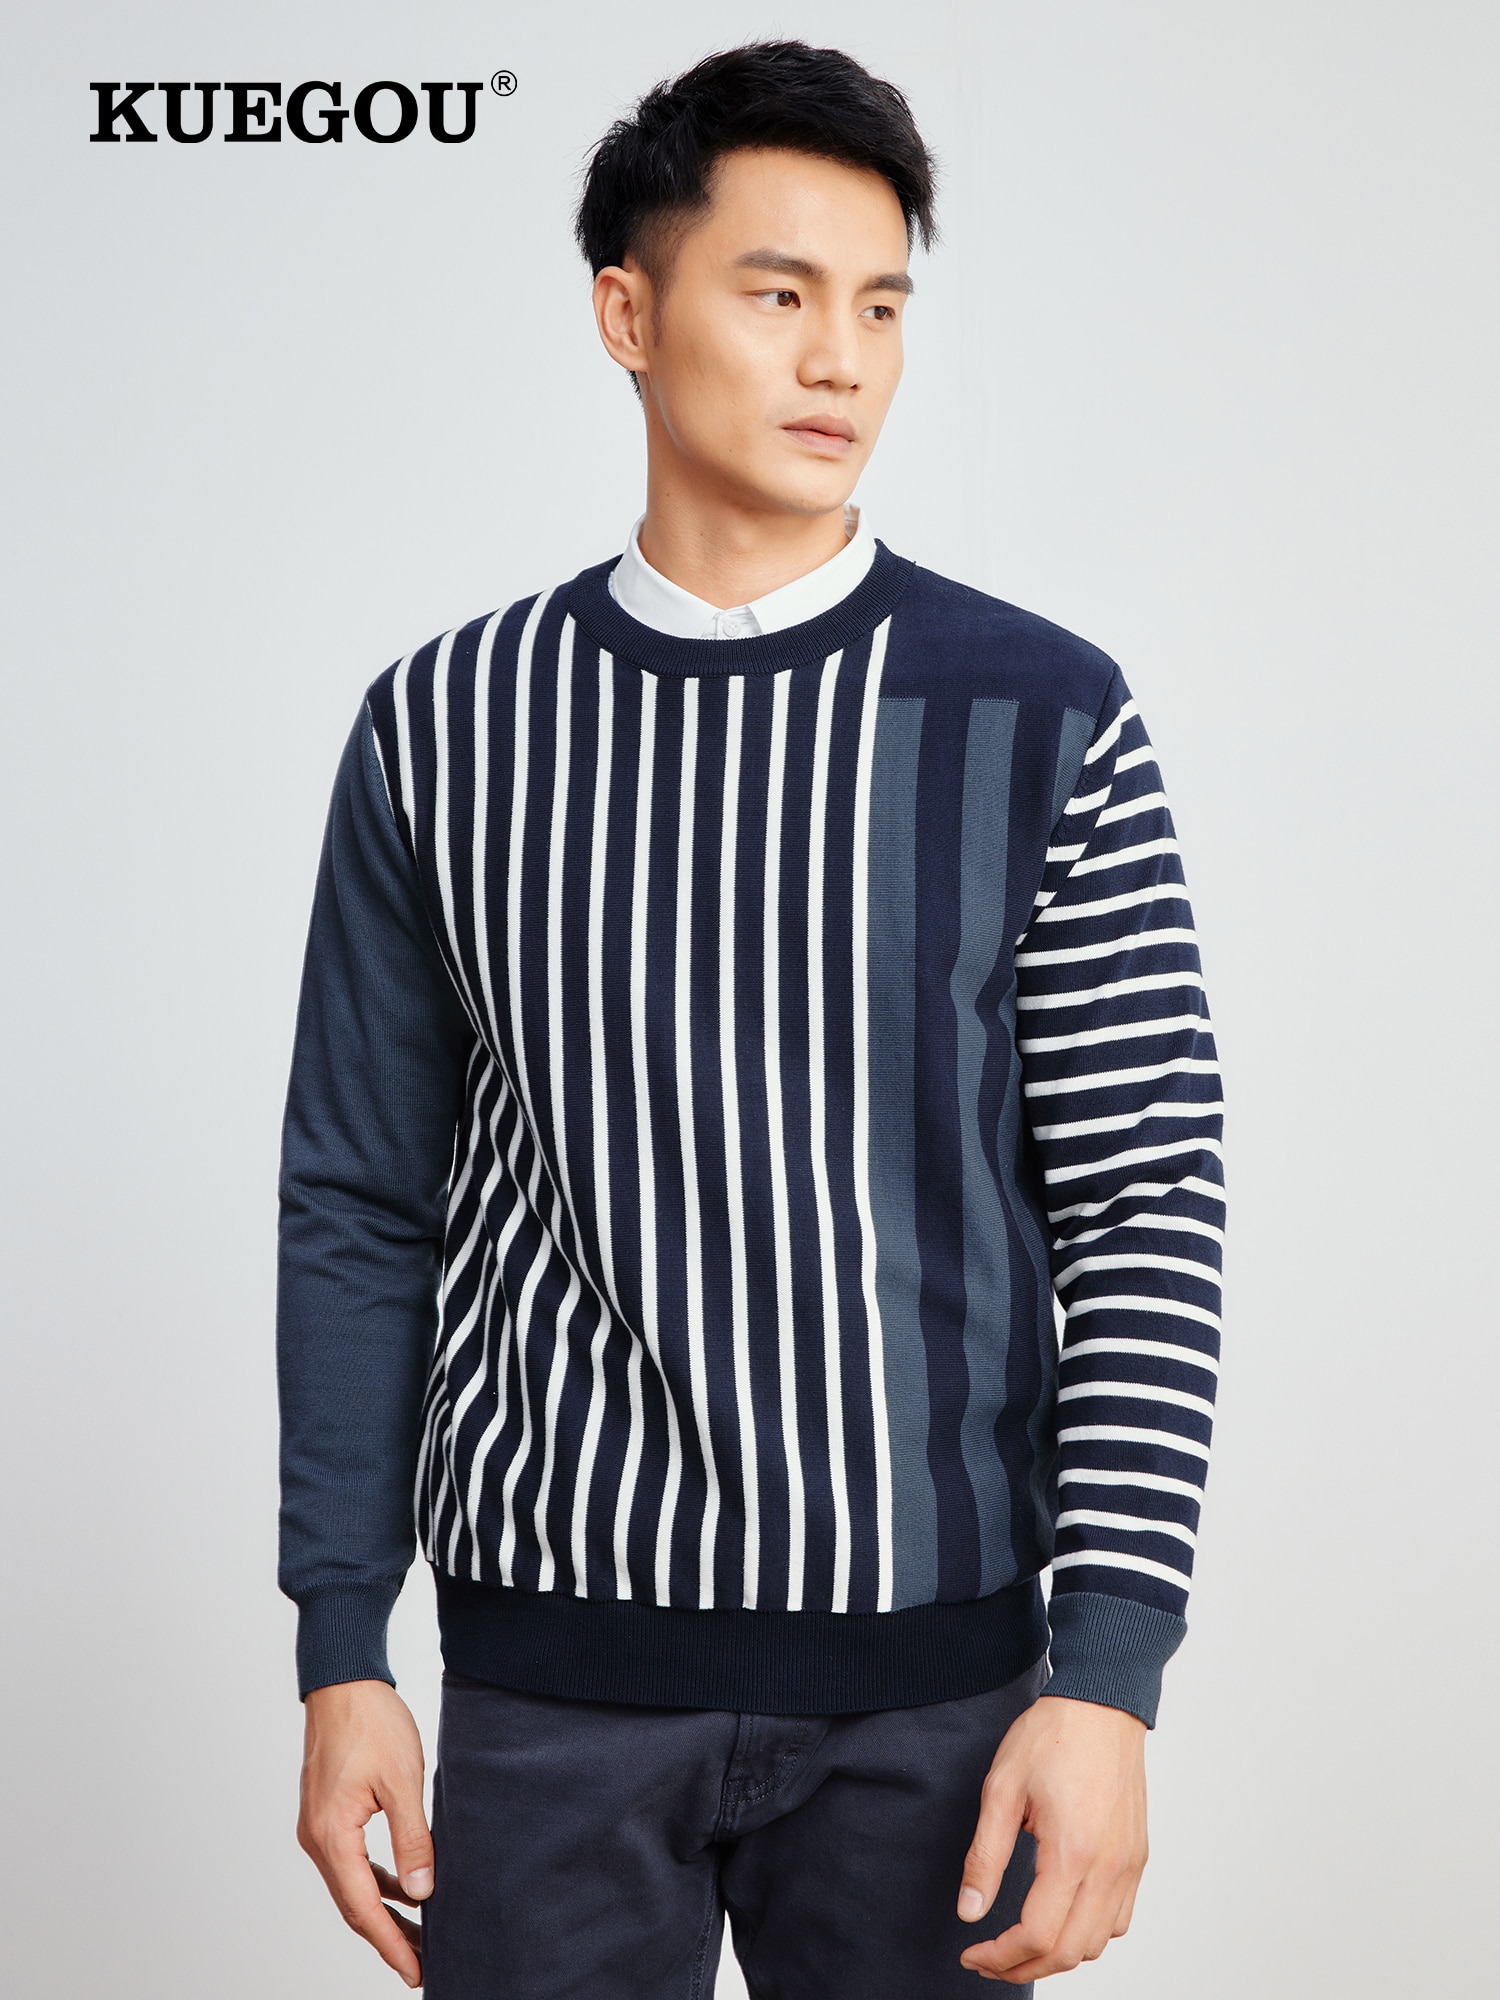 2022 New Arrivals Spring Men O-Neck Sweater Fashion Striped Pullover Male Autumn Casual Knitted Sweaters Slim Tops Clothing L54